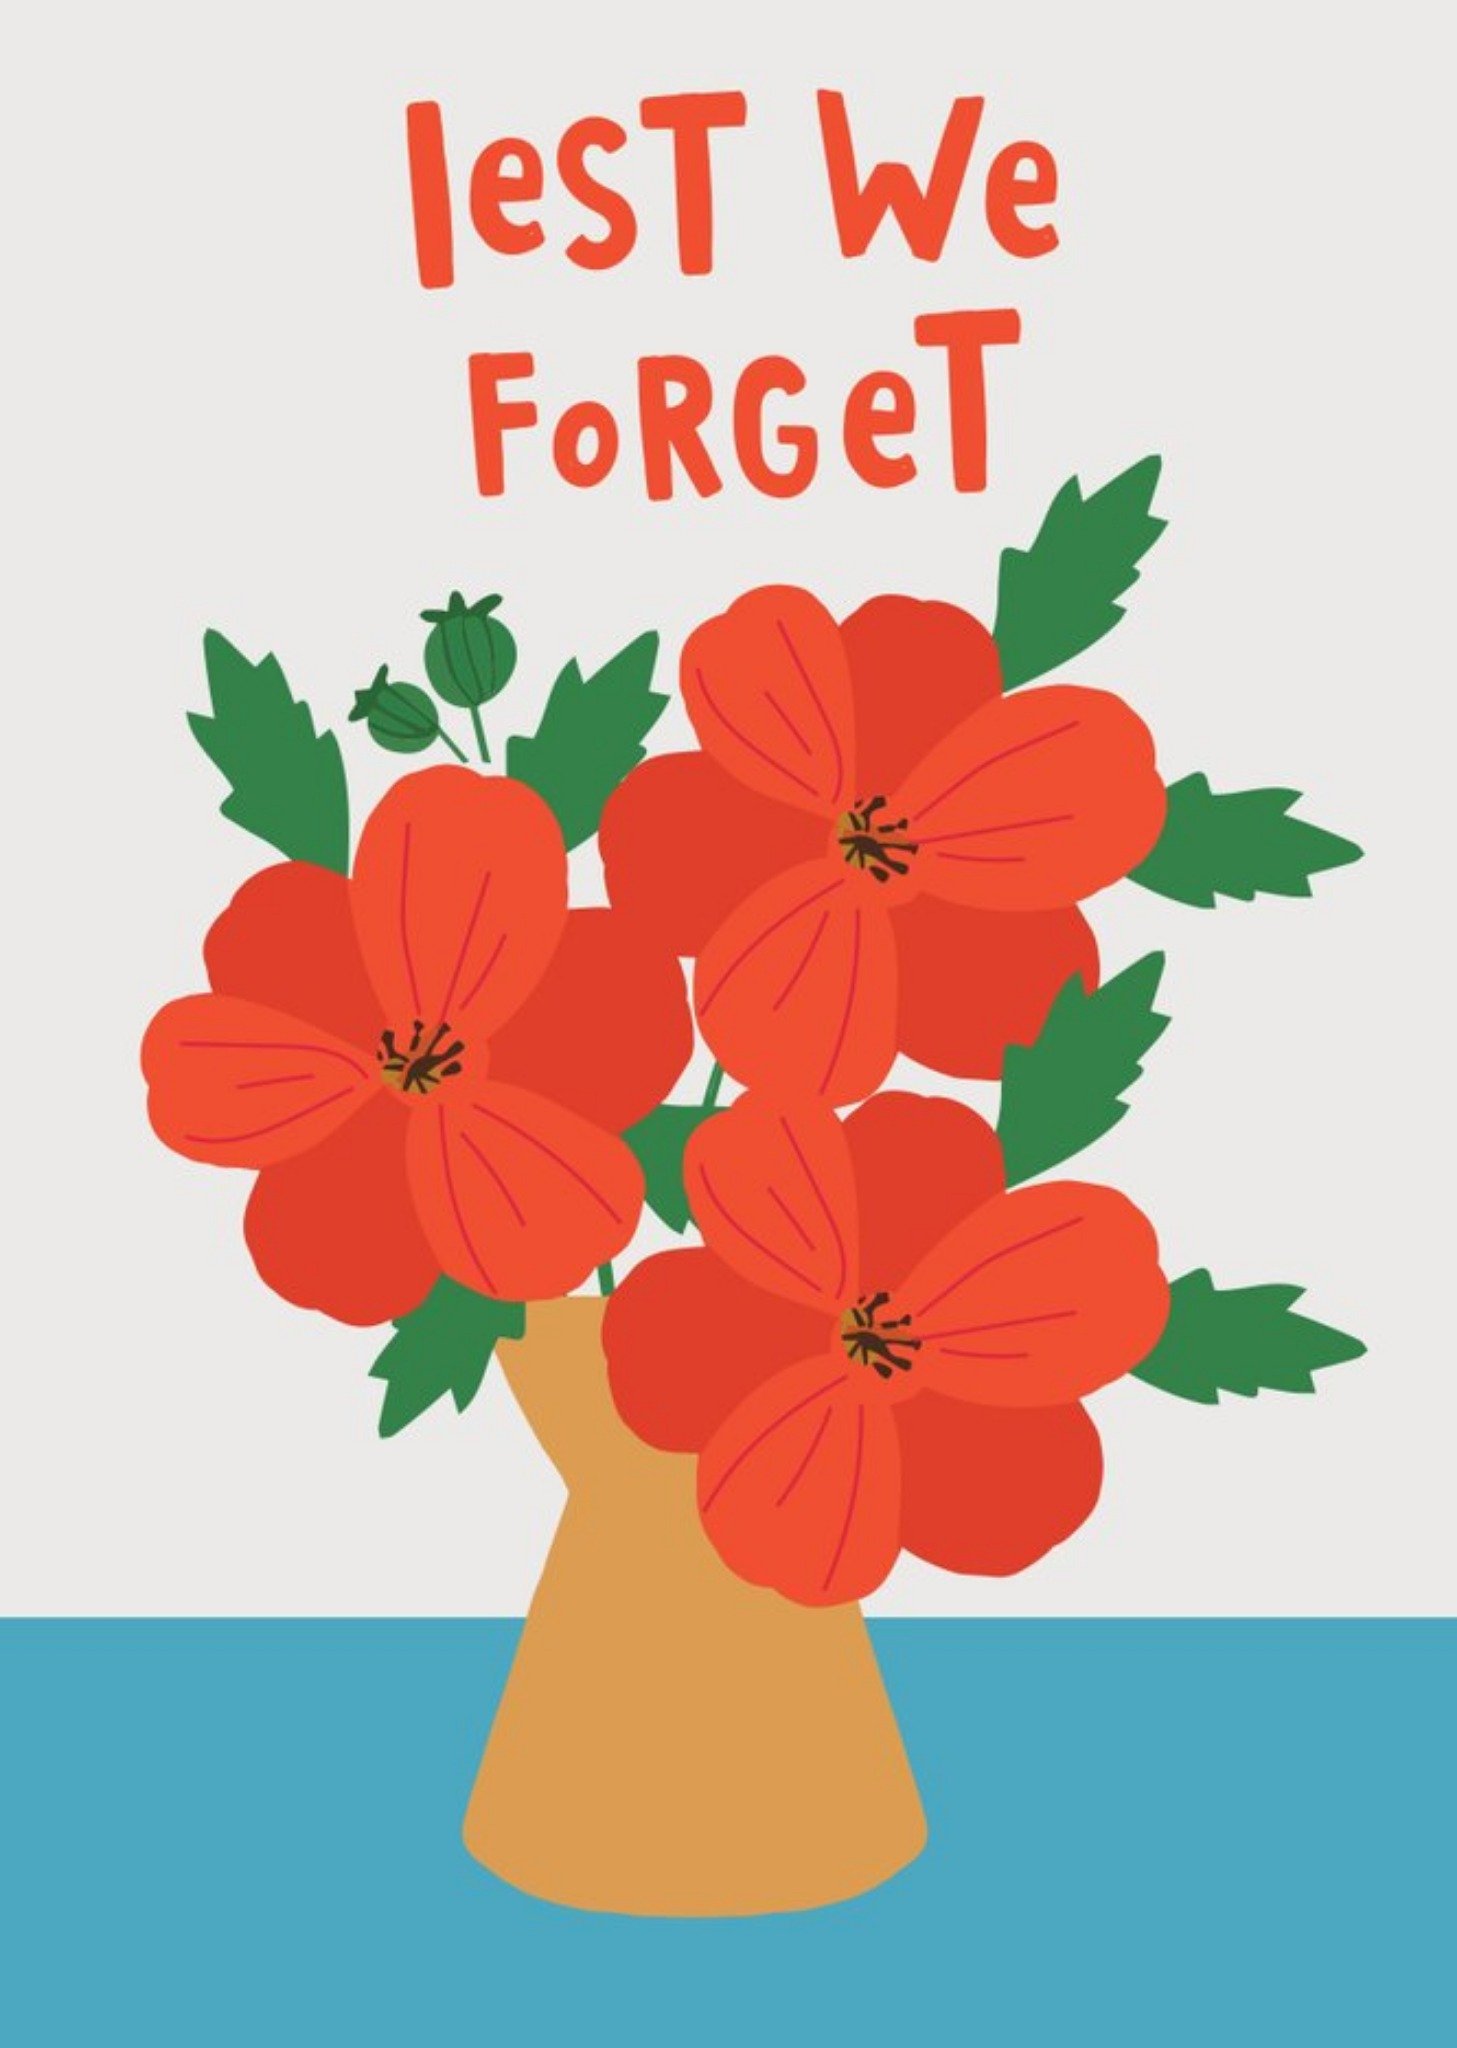 Moonpig Bright Colourful Vase Of Red Poppies Illustration Lest We Forget Card Ecard